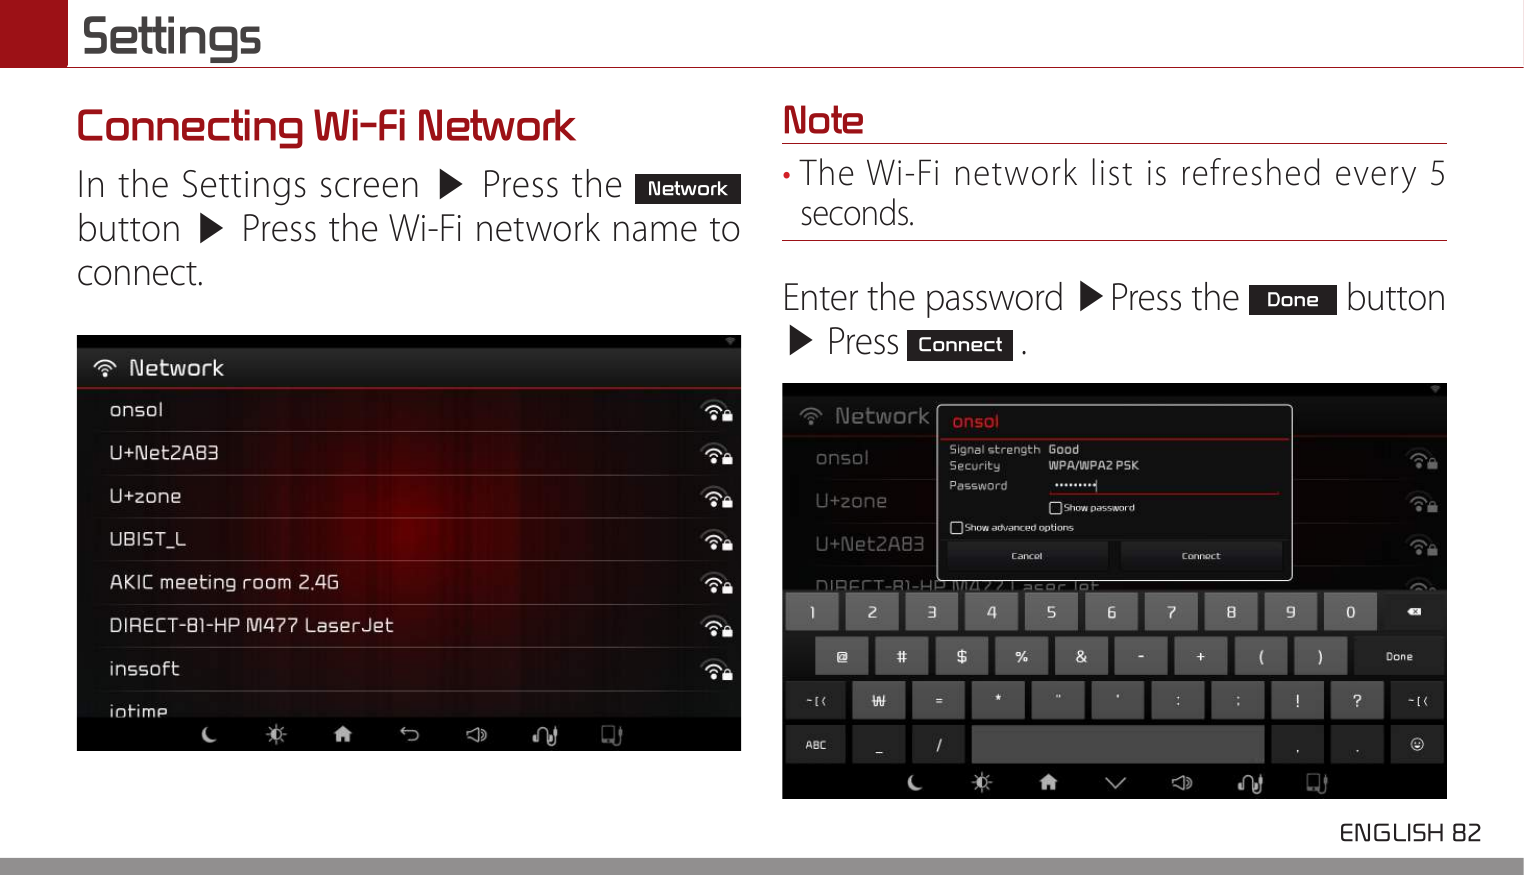 Settings ENGLISH 82 Connecting Wi-Fi NetworkIn the Settings screen ▶ Press the Network button ▶ Press the Wi-Fi network name to connect.Note• The Wi-Fi network list is refreshed every 5 seconds.Enter the password ▶Press the Done button ▶ Press Connect .